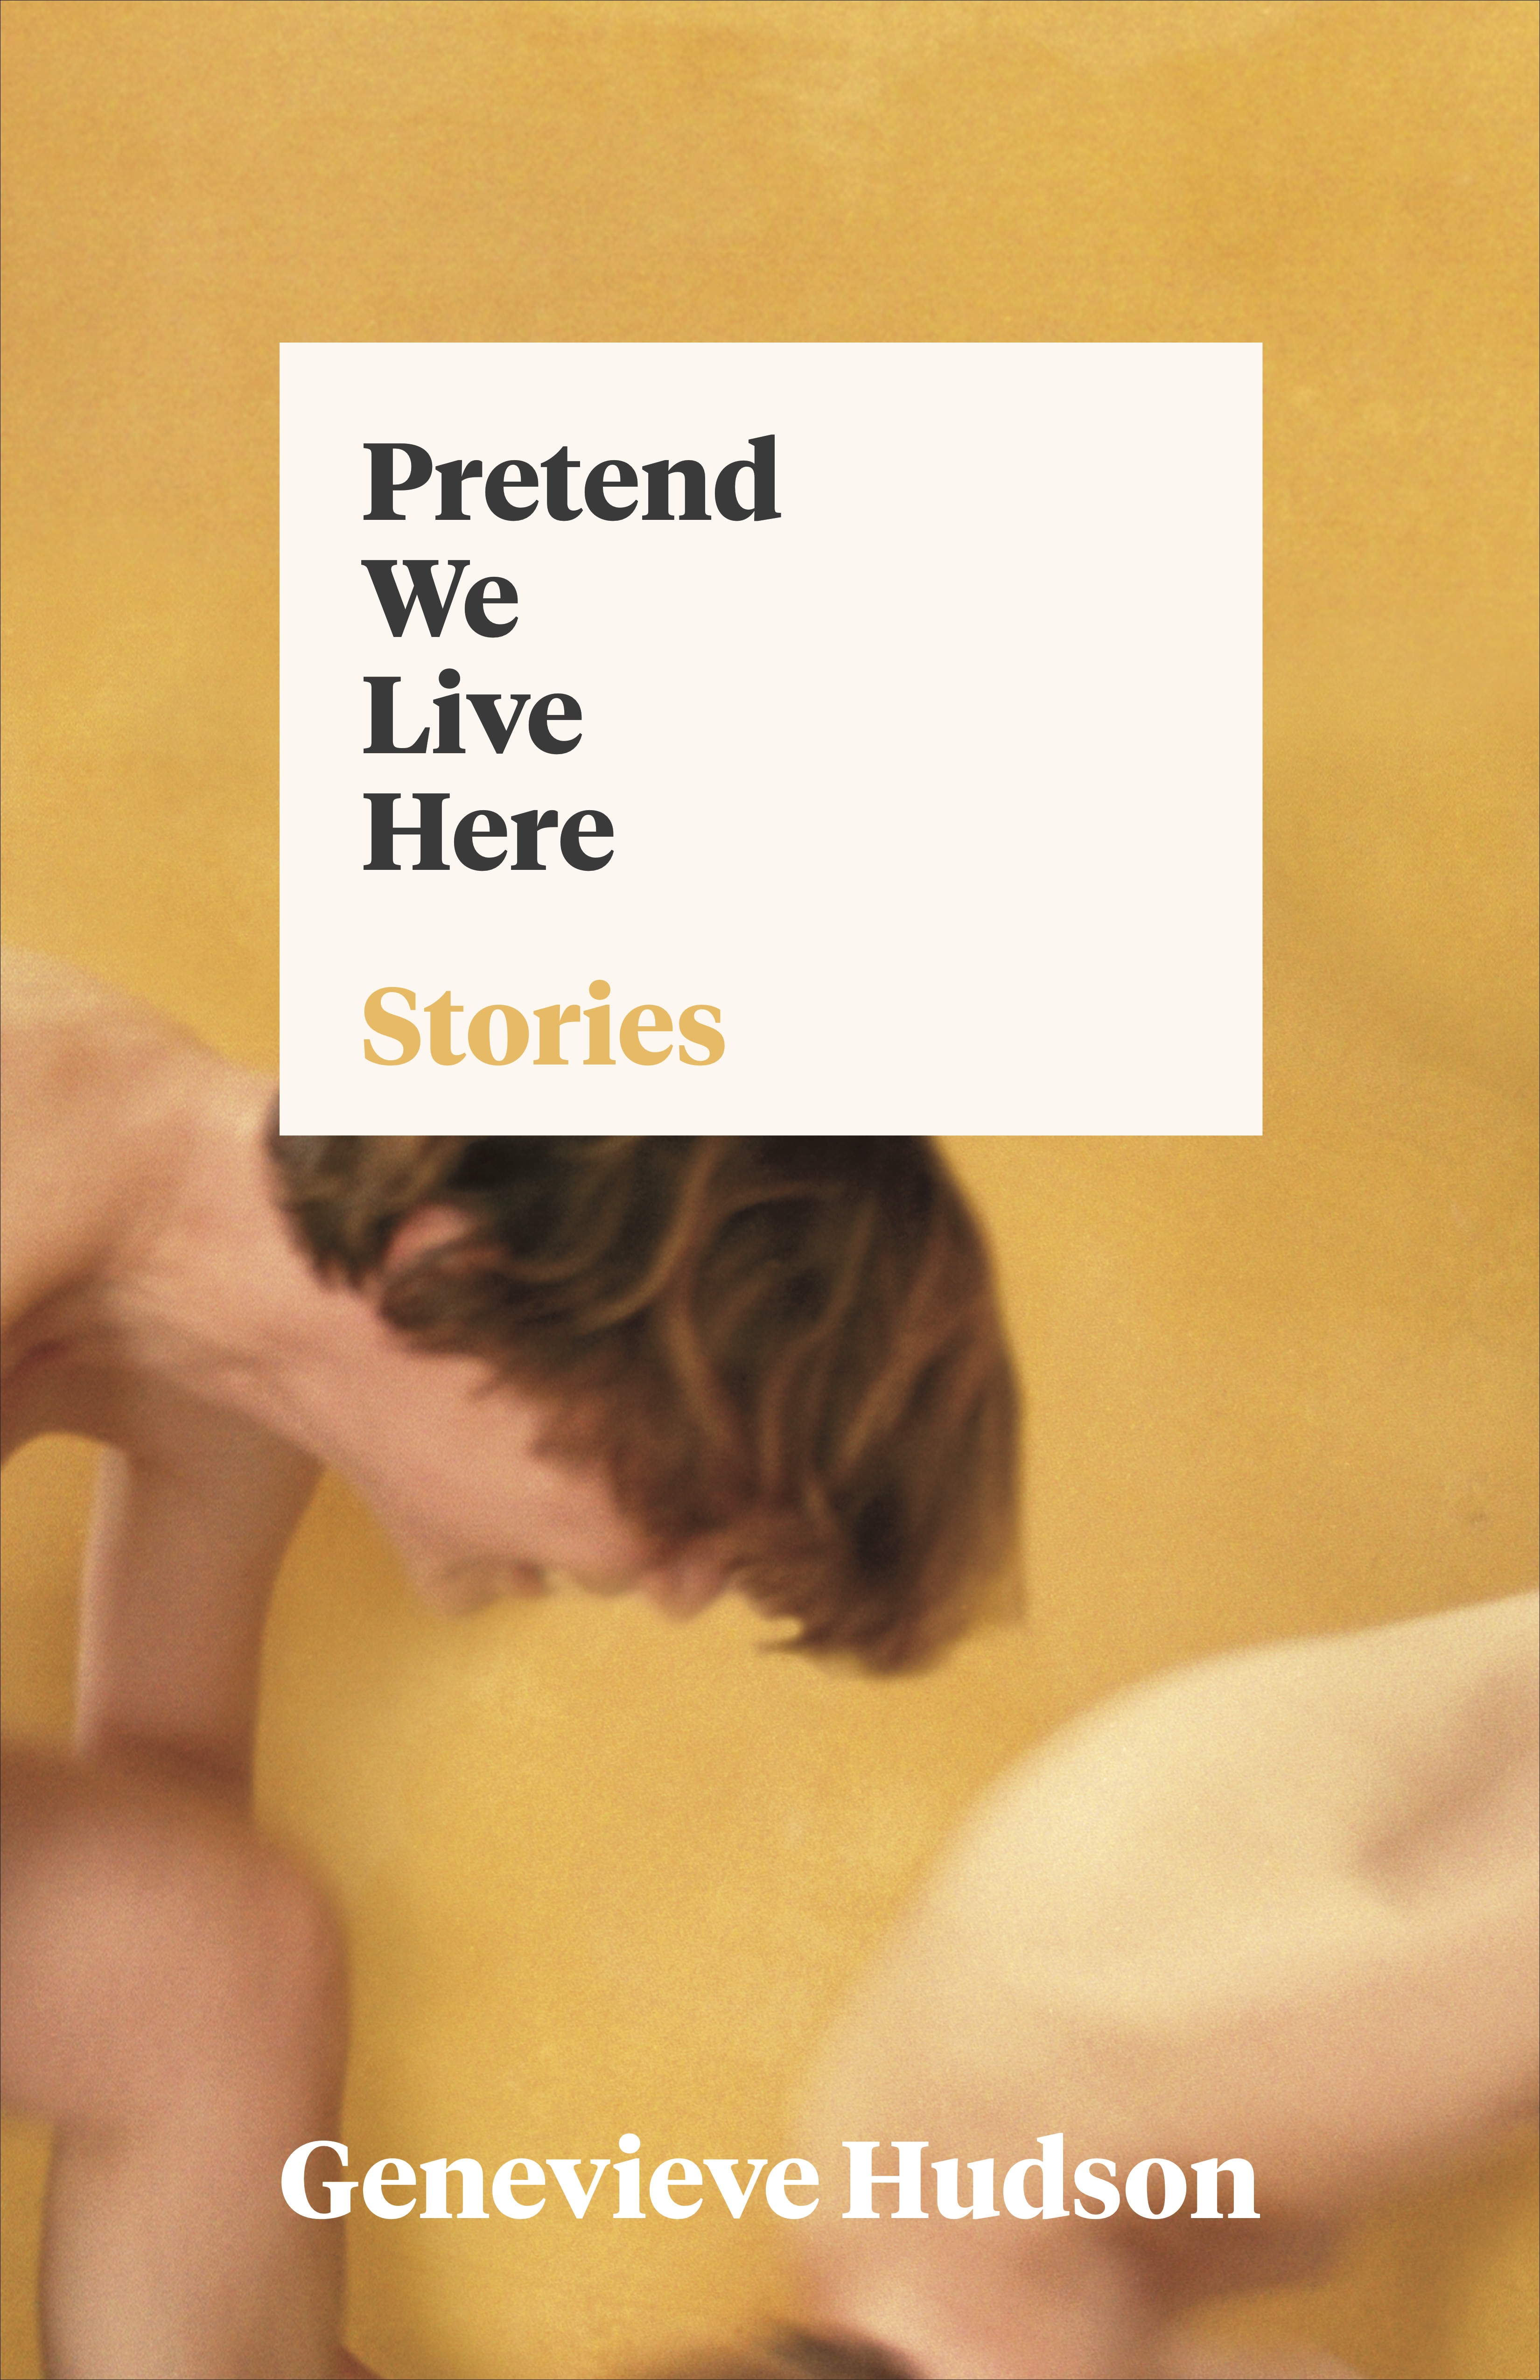 Book Launch & Reading: Pretend We Live Here by Genevieve Hudson — Featuring Readings by T Kira Madden, Alisson Wood, & more TBA